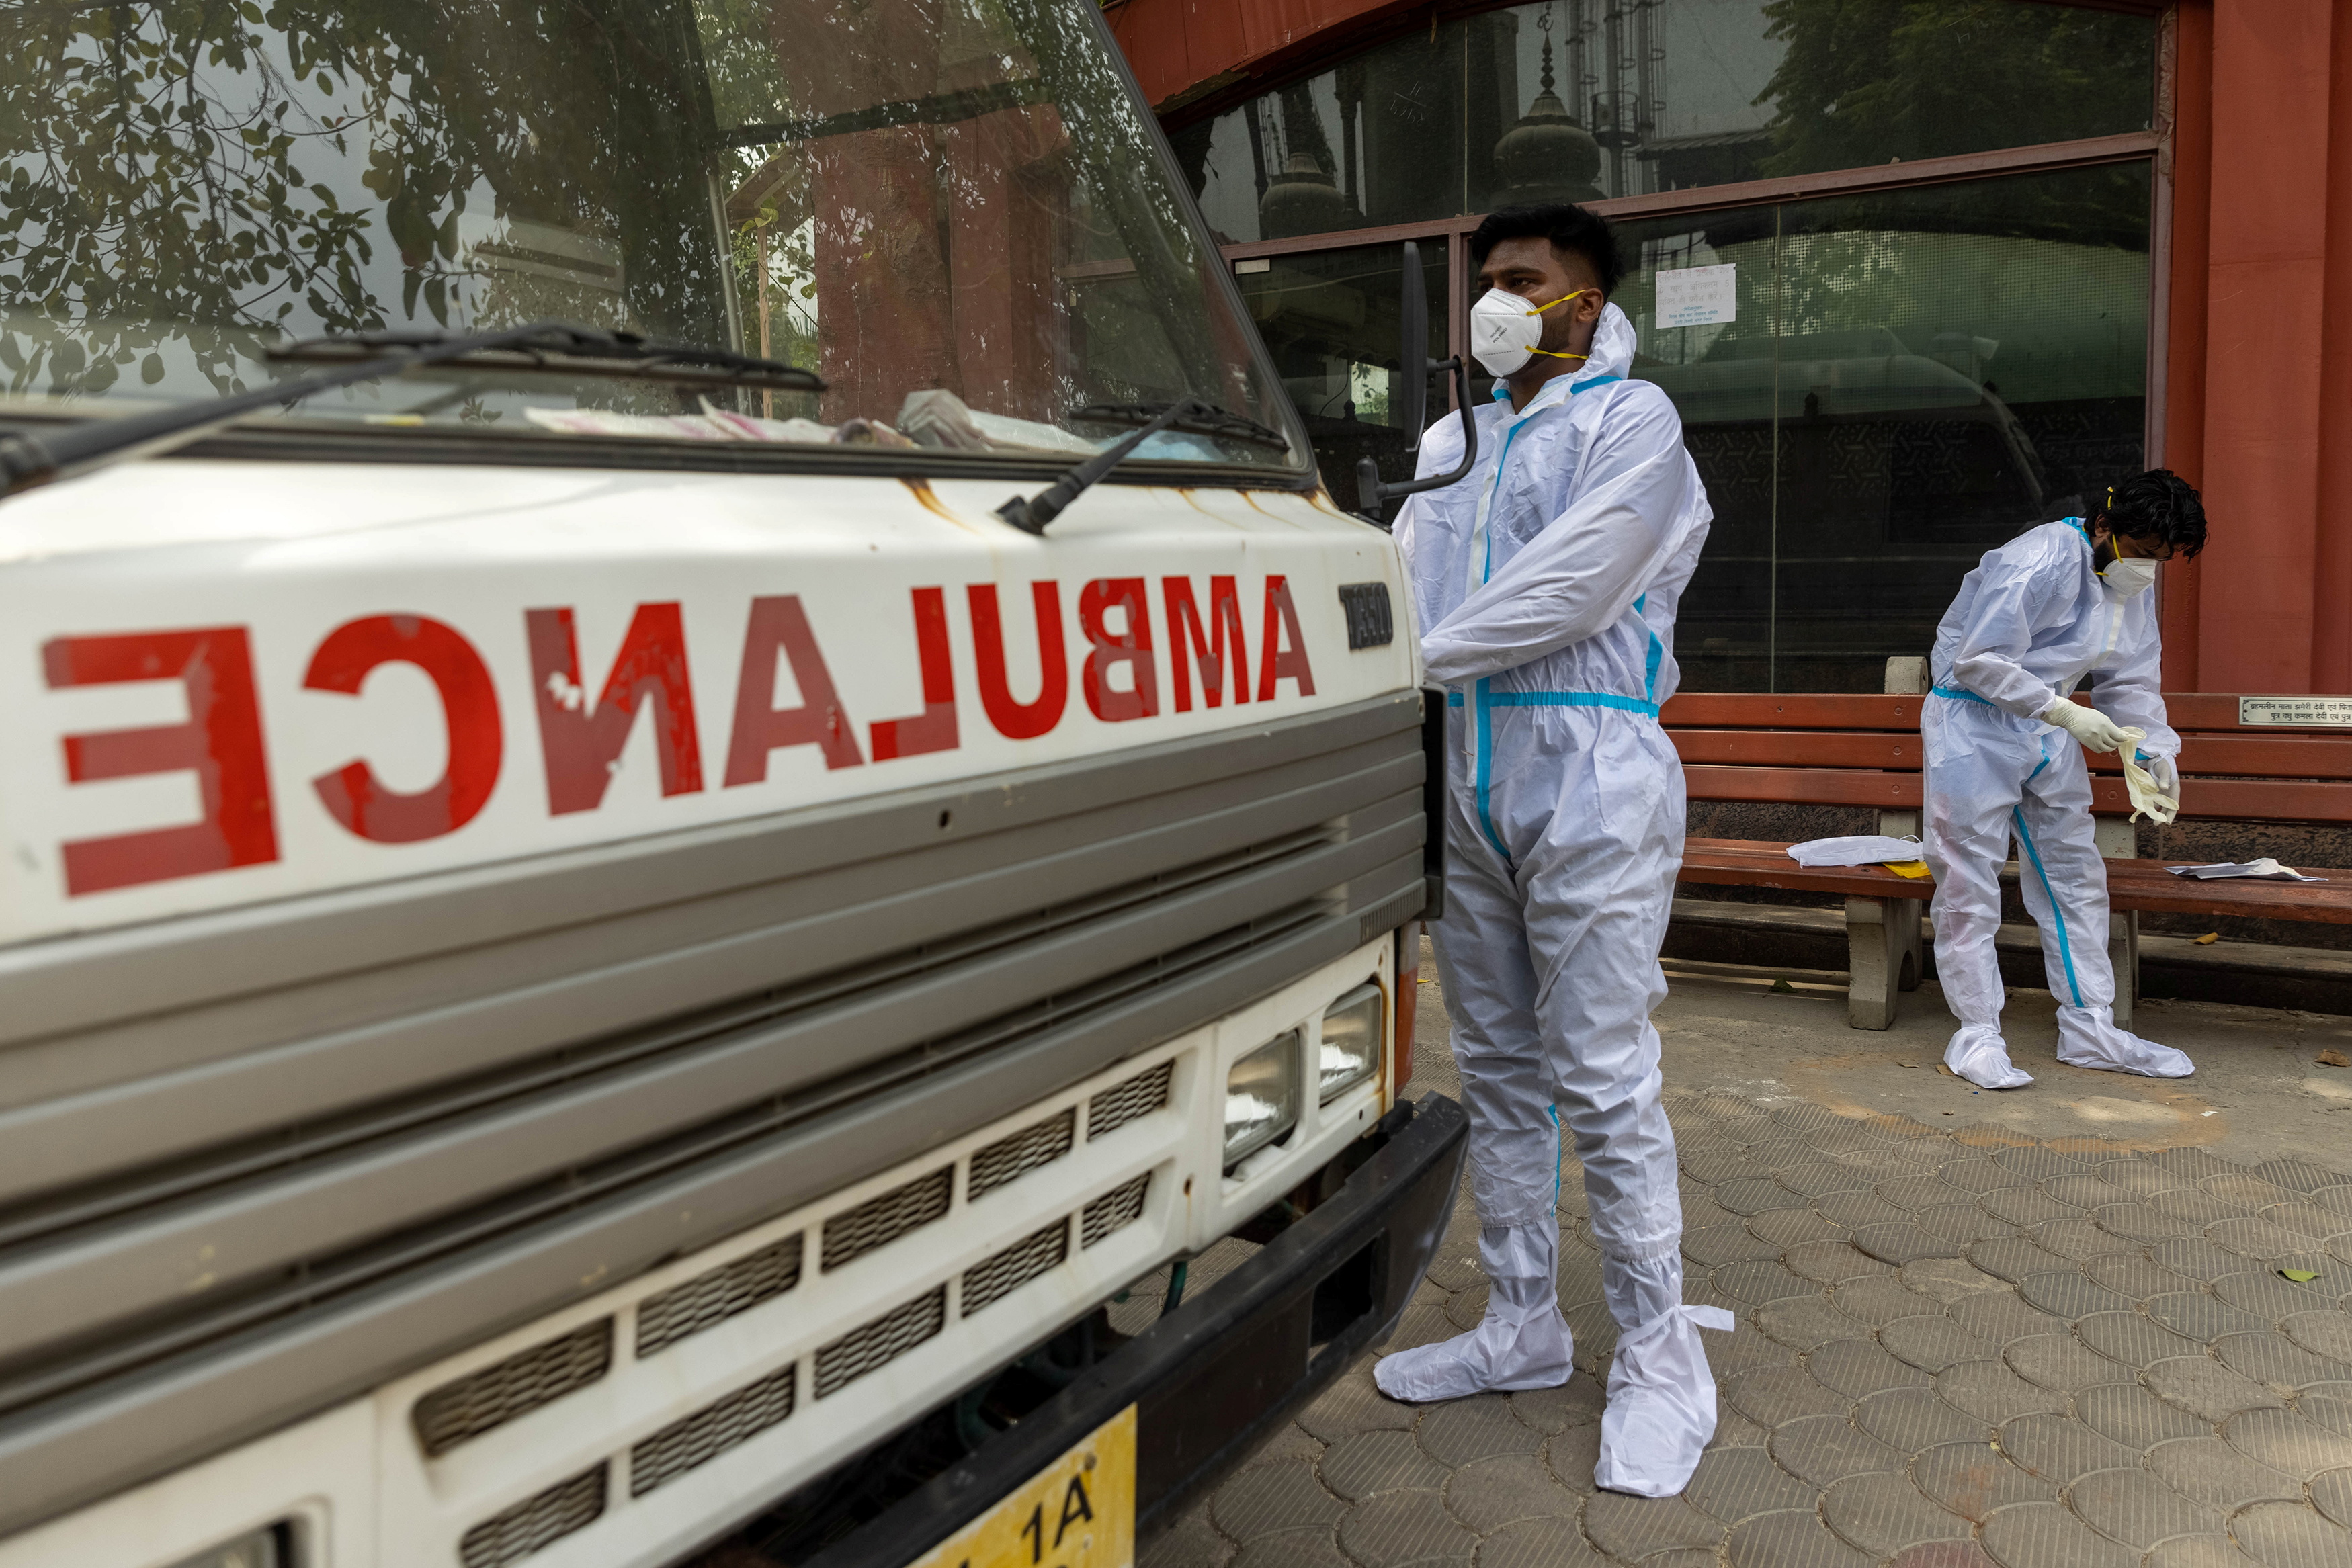 Health workers wear personal protective equipment (PPE) as they prepare to carry the body of a person, who died from complications related to the coronavirus disease (COVID-19), for cremation at a crematorium in New Delhi